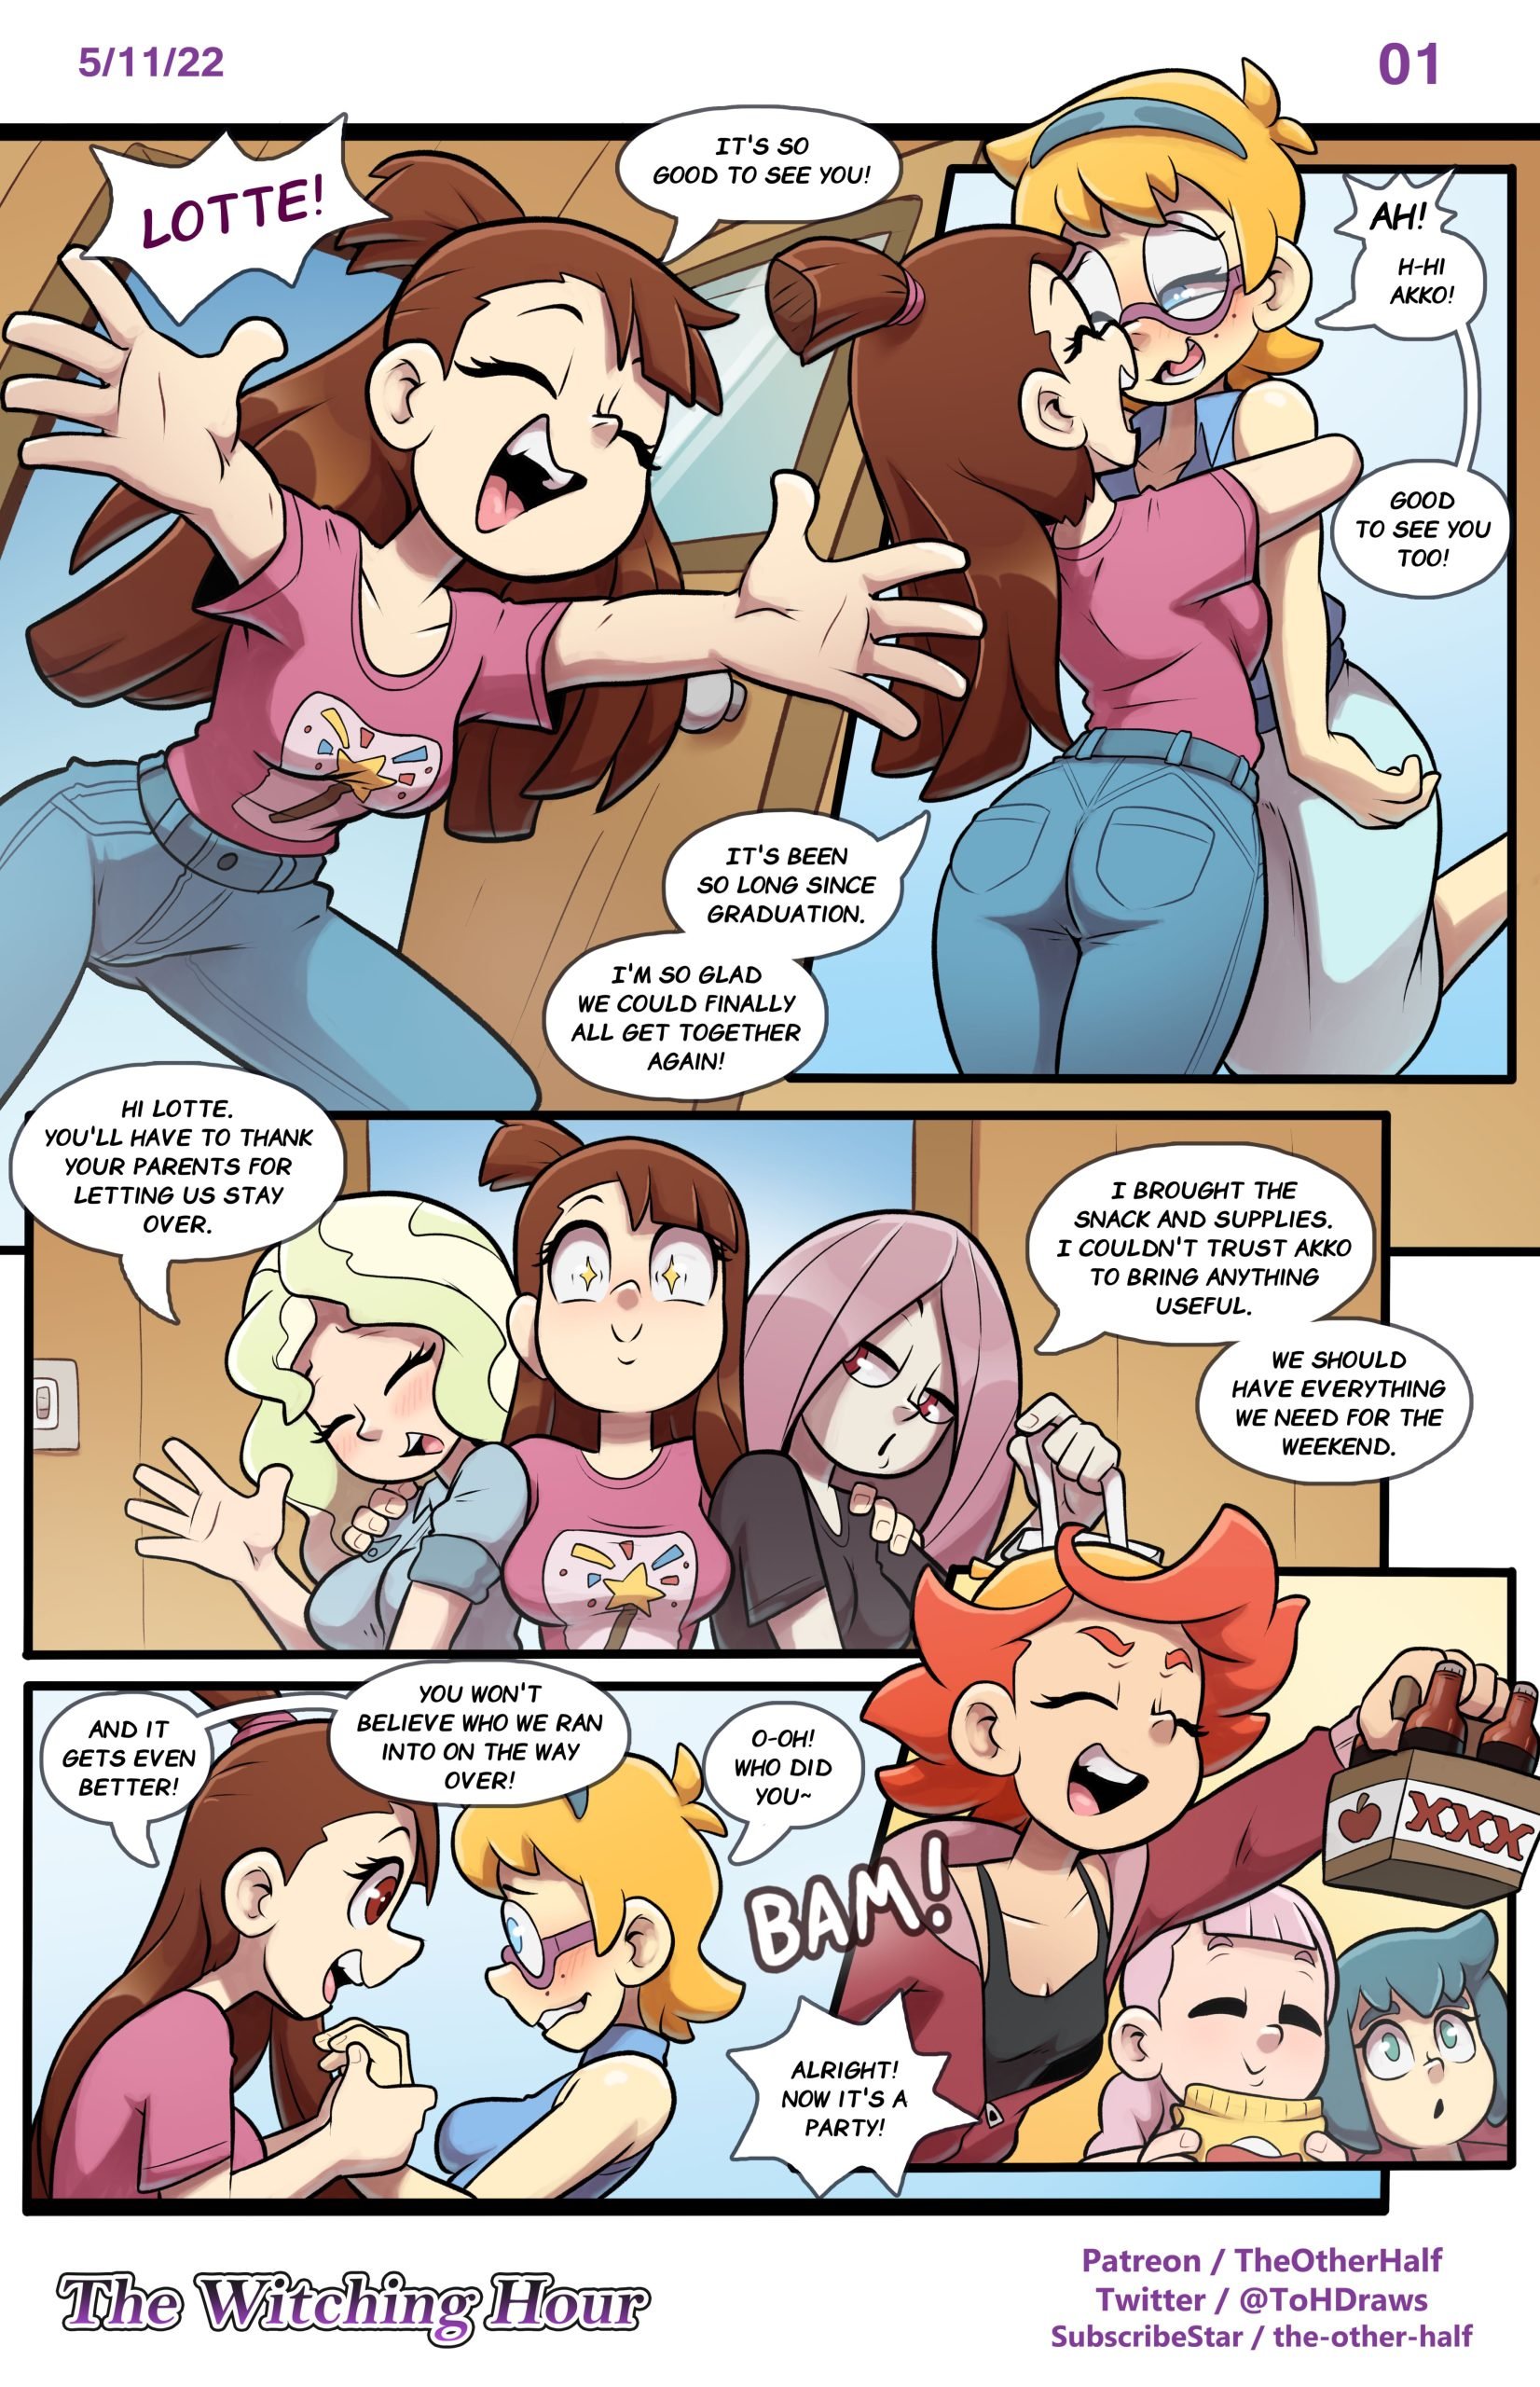 The Witching Hour (Little Witch Academia) TheOtherHalf Porn Comic pic